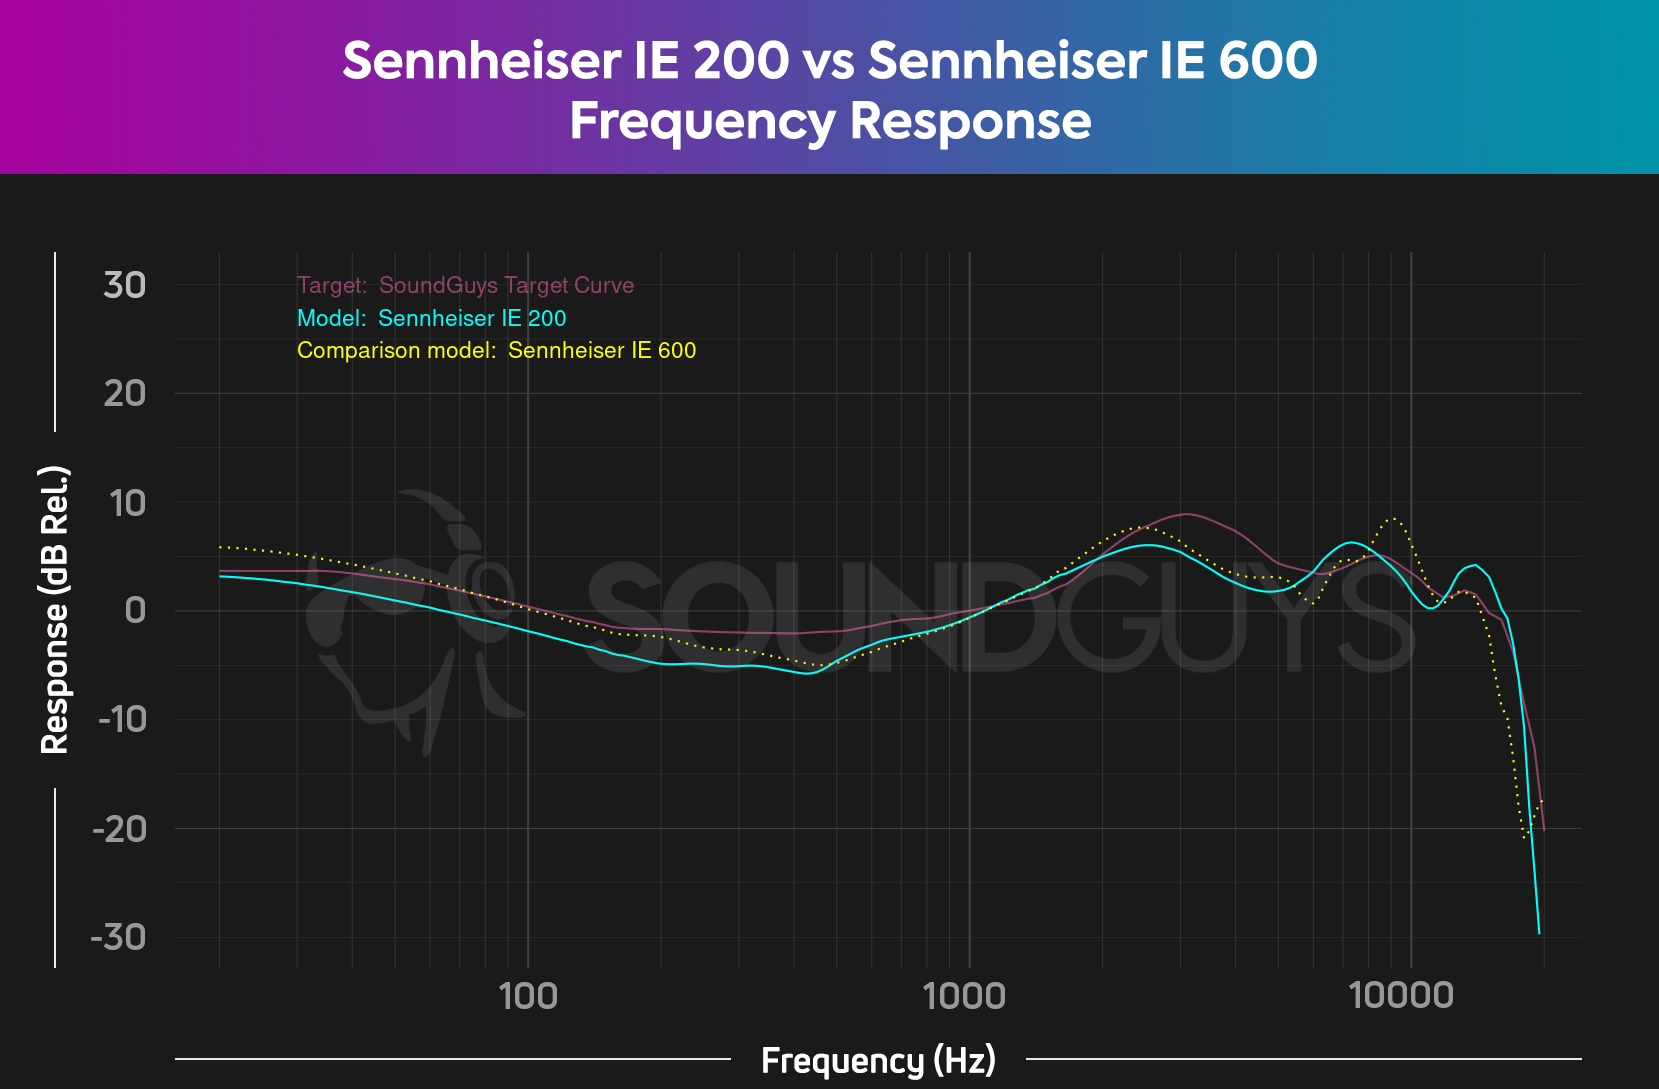 A chart compares the Sennheiser IE 200 to the Sennheiser IE 600 and our target curve.